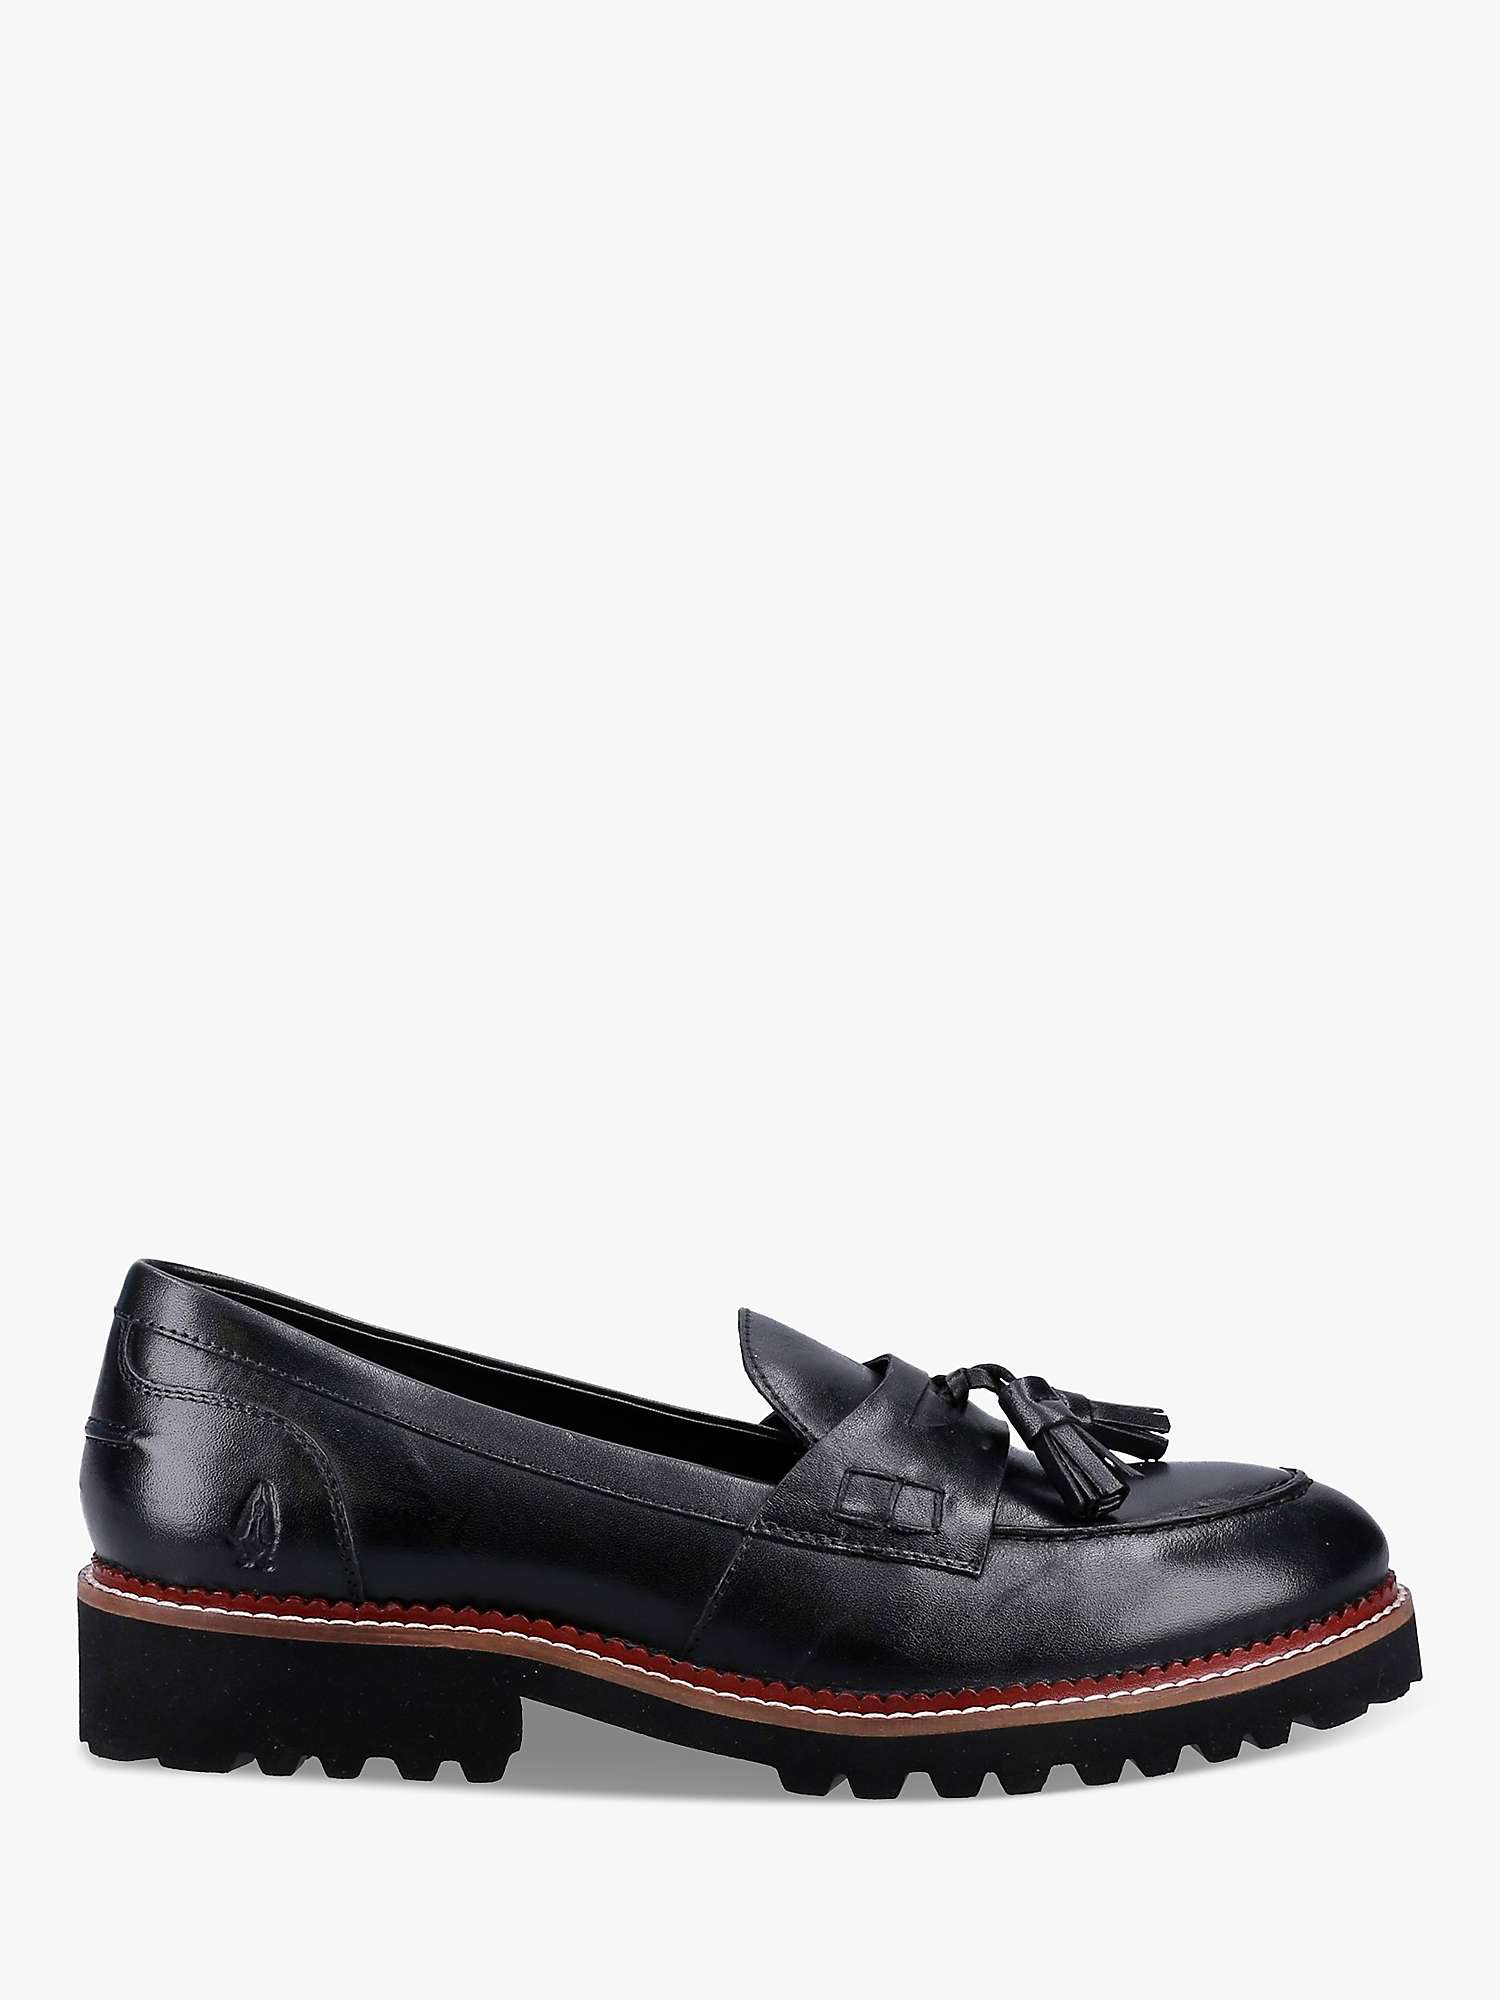 Buy Hush Puppies Ginny Leather Loafers Online at johnlewis.com